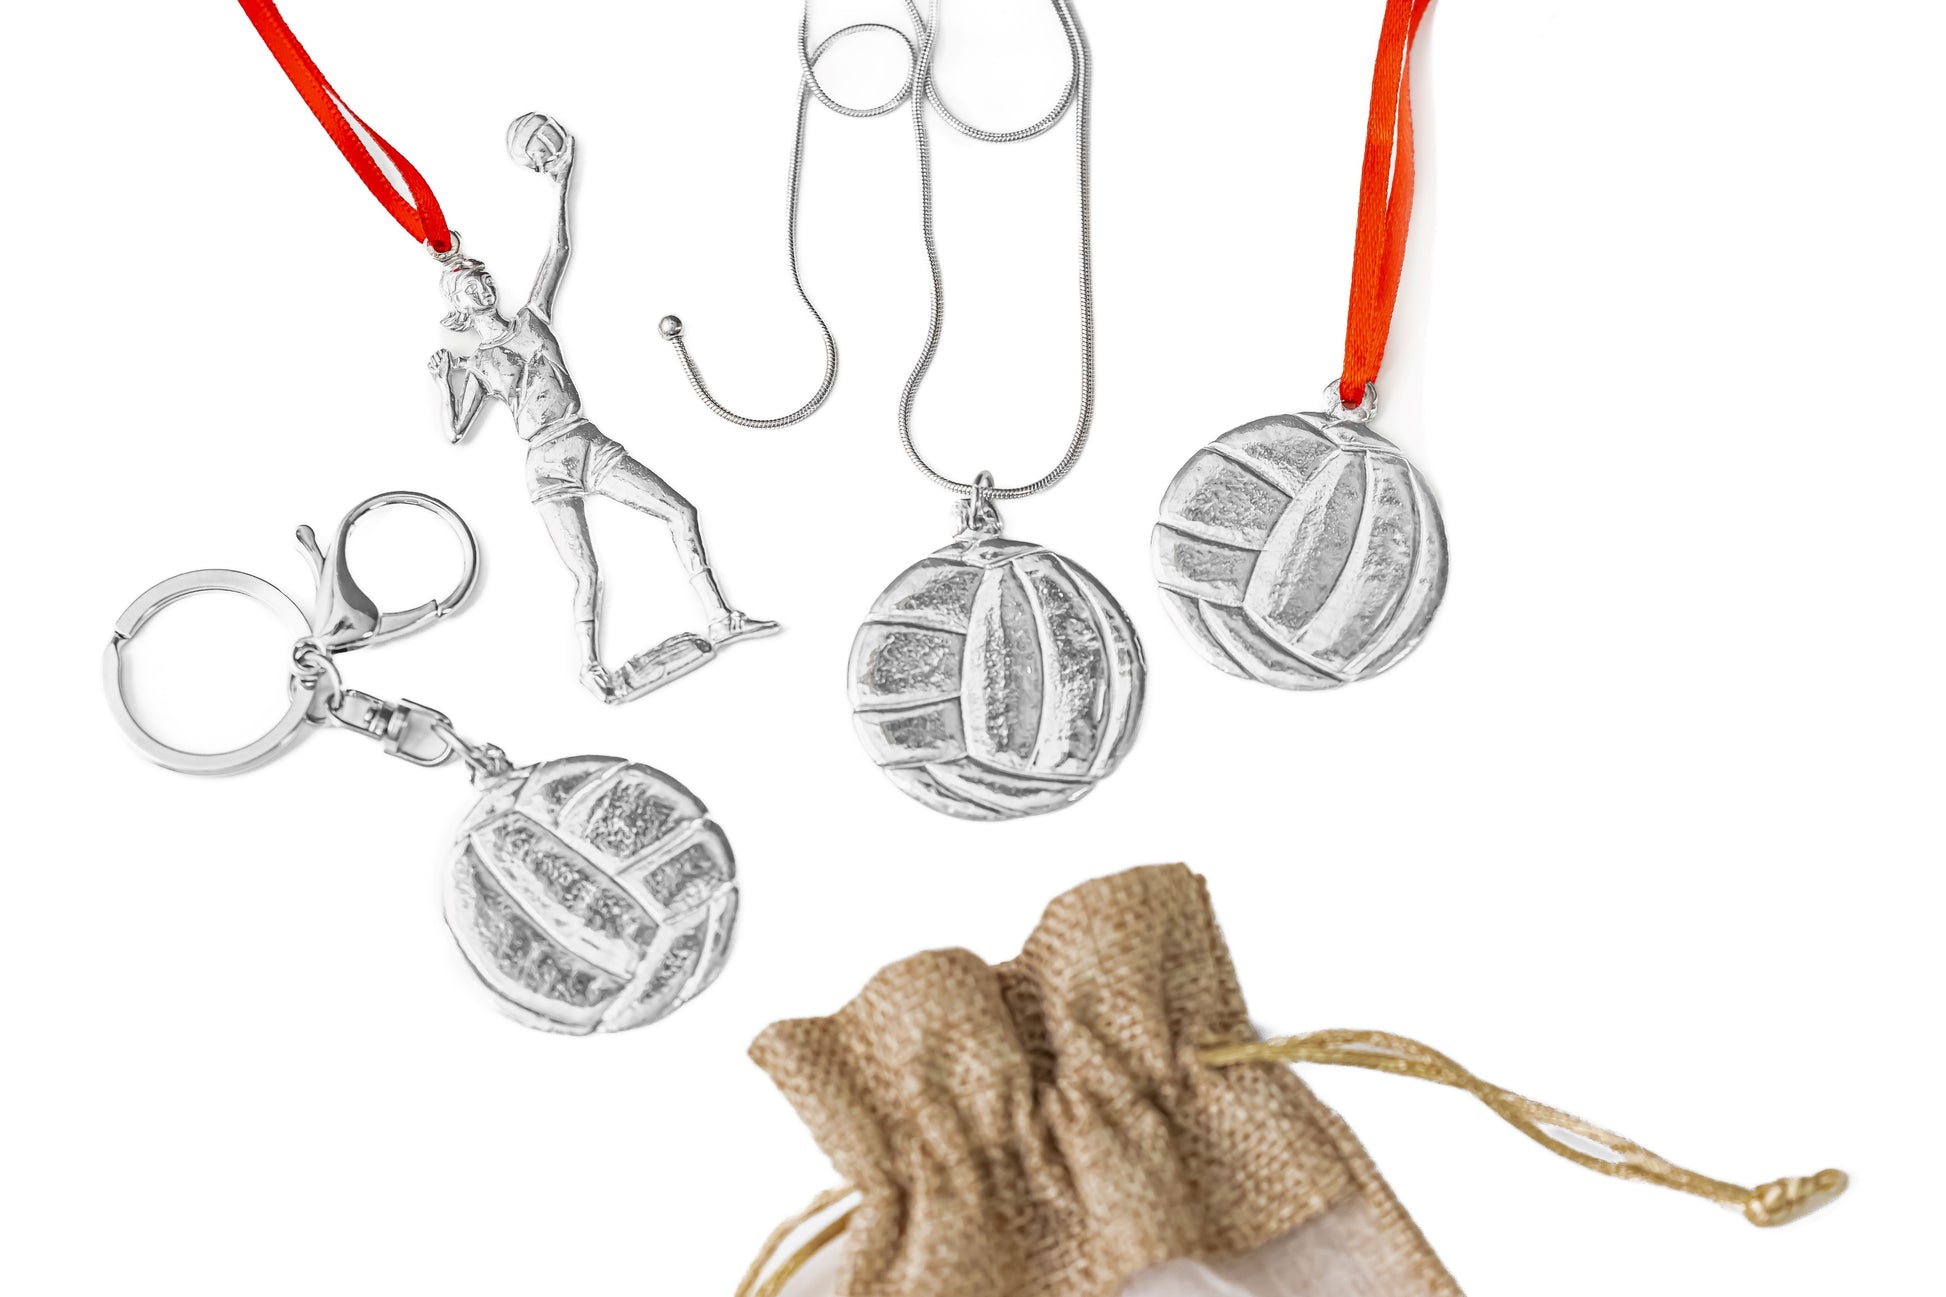 Silver Pewter Metal Volleyball Jewelry Gift Set Top Gift Ideas - House of Morgan Pewter